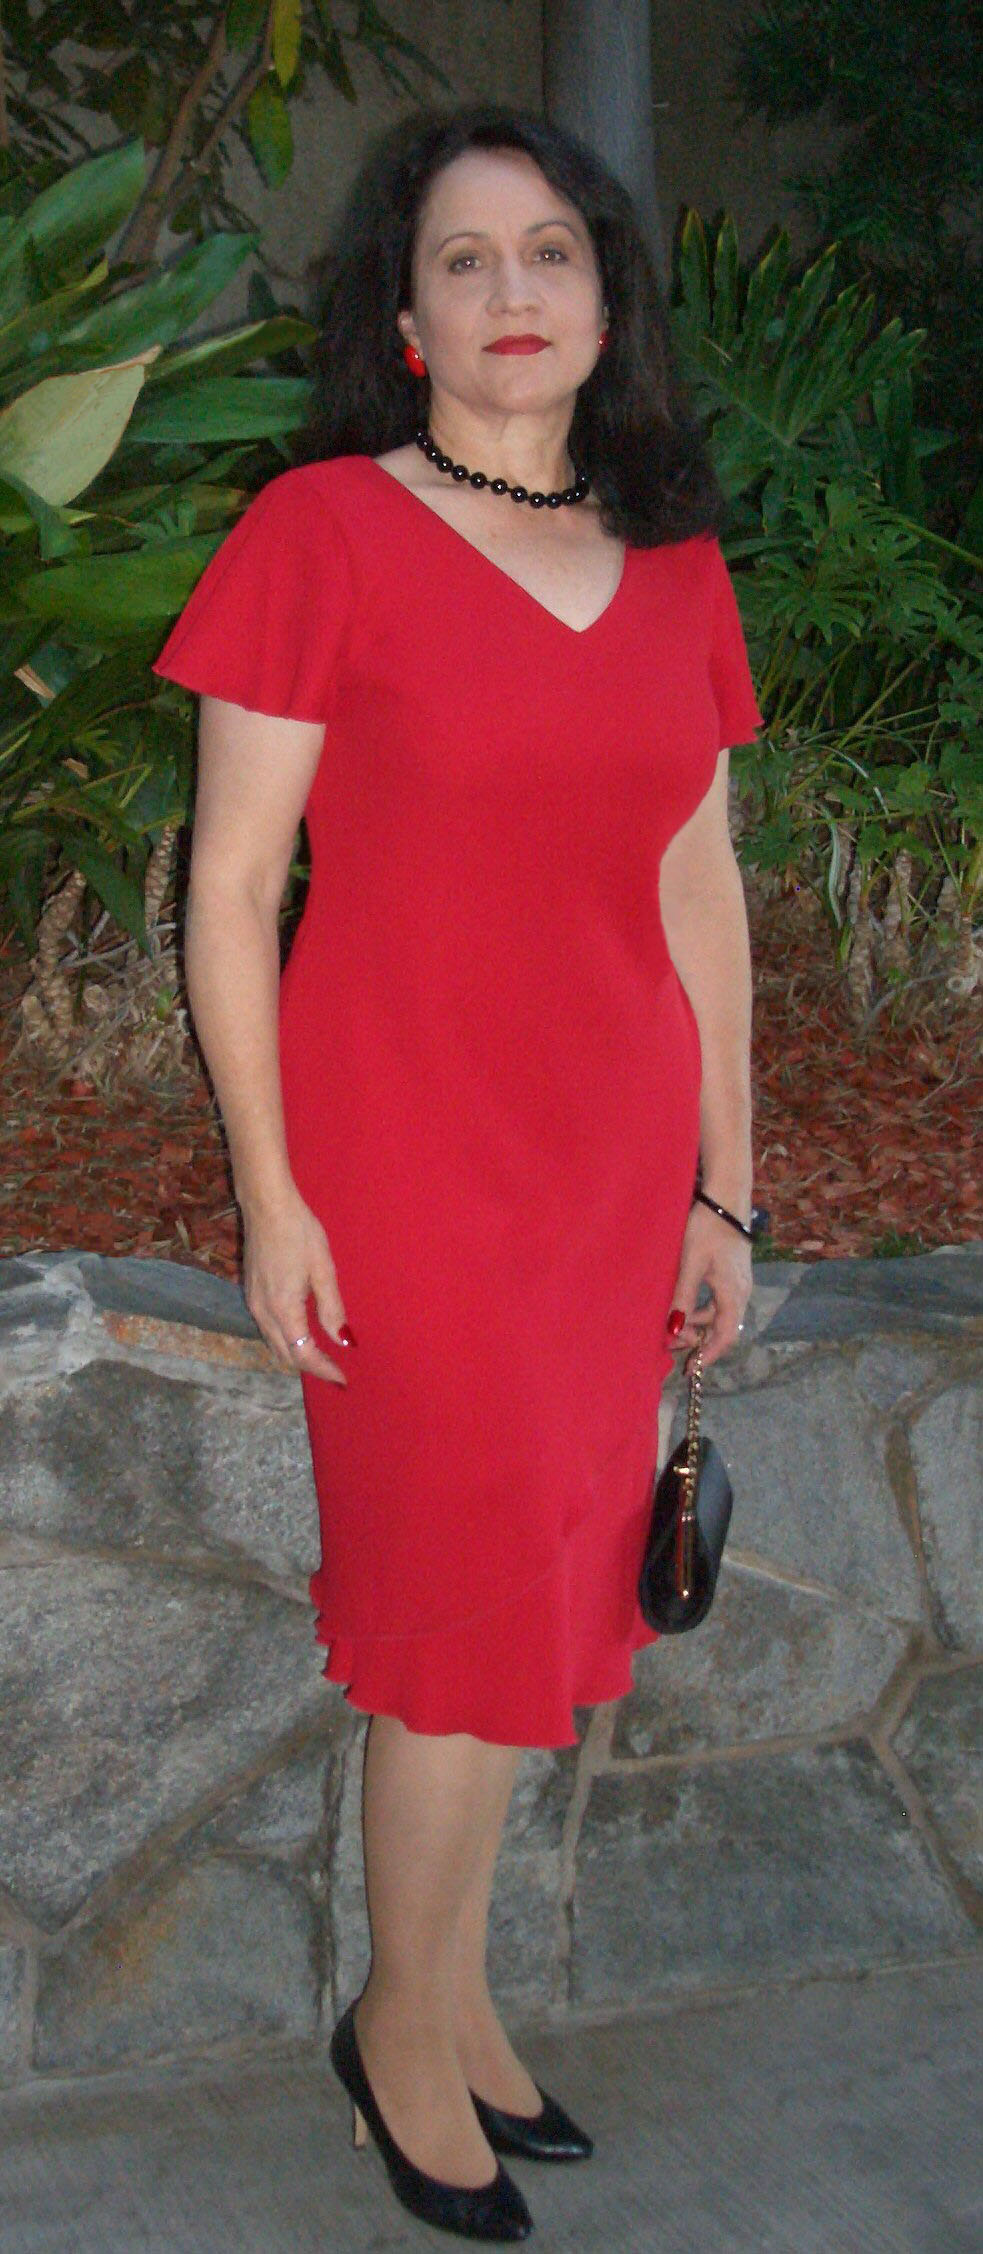 at a networking event in Dana Point, California 2009